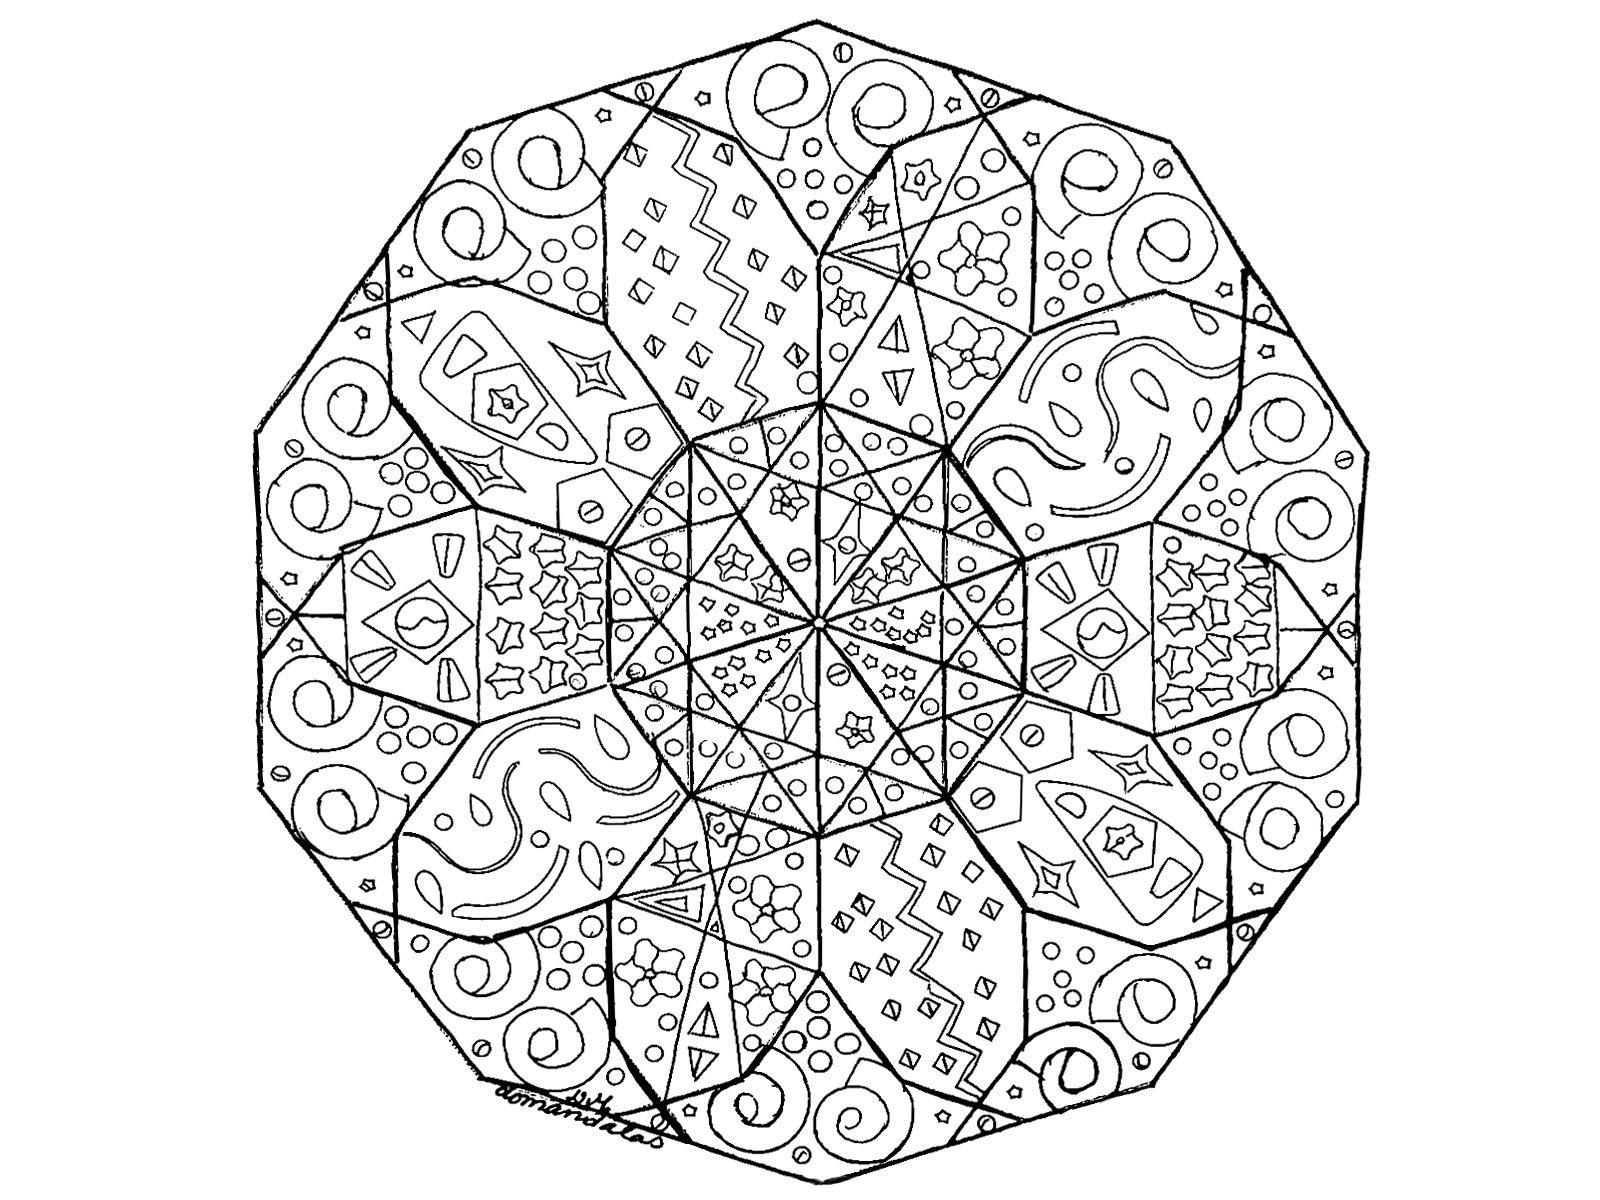 Details relatively easy to color, for a Mandala coloring page very original and of high quality. Feel free to let your instincts decide where to color, and what colors to choose.